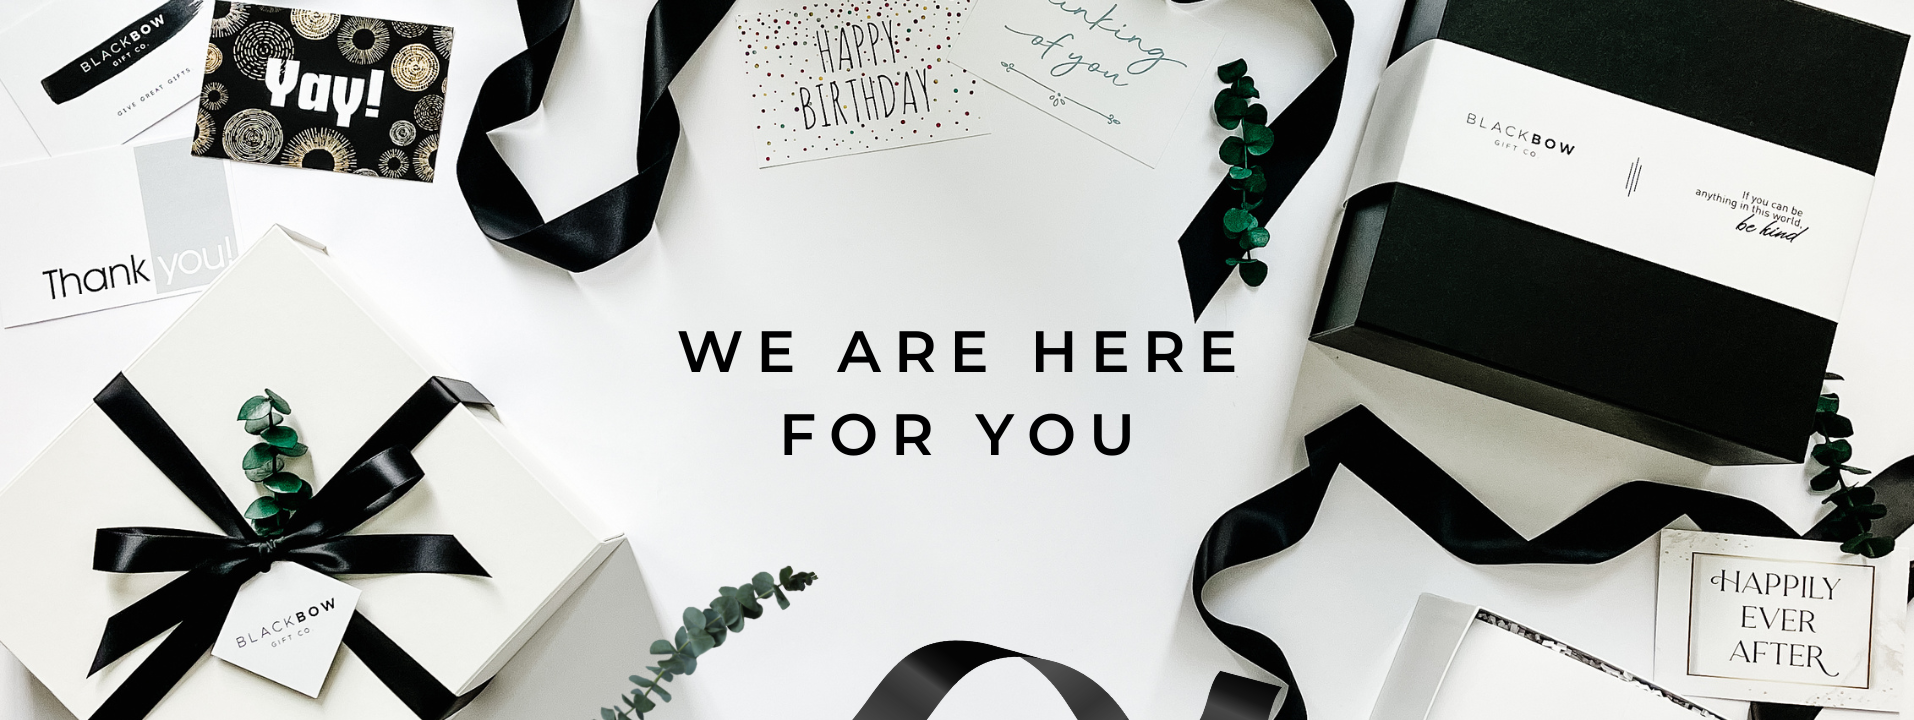 We're Here To Help Make Your Gift Perfect | Contact Us Here! - Black ...